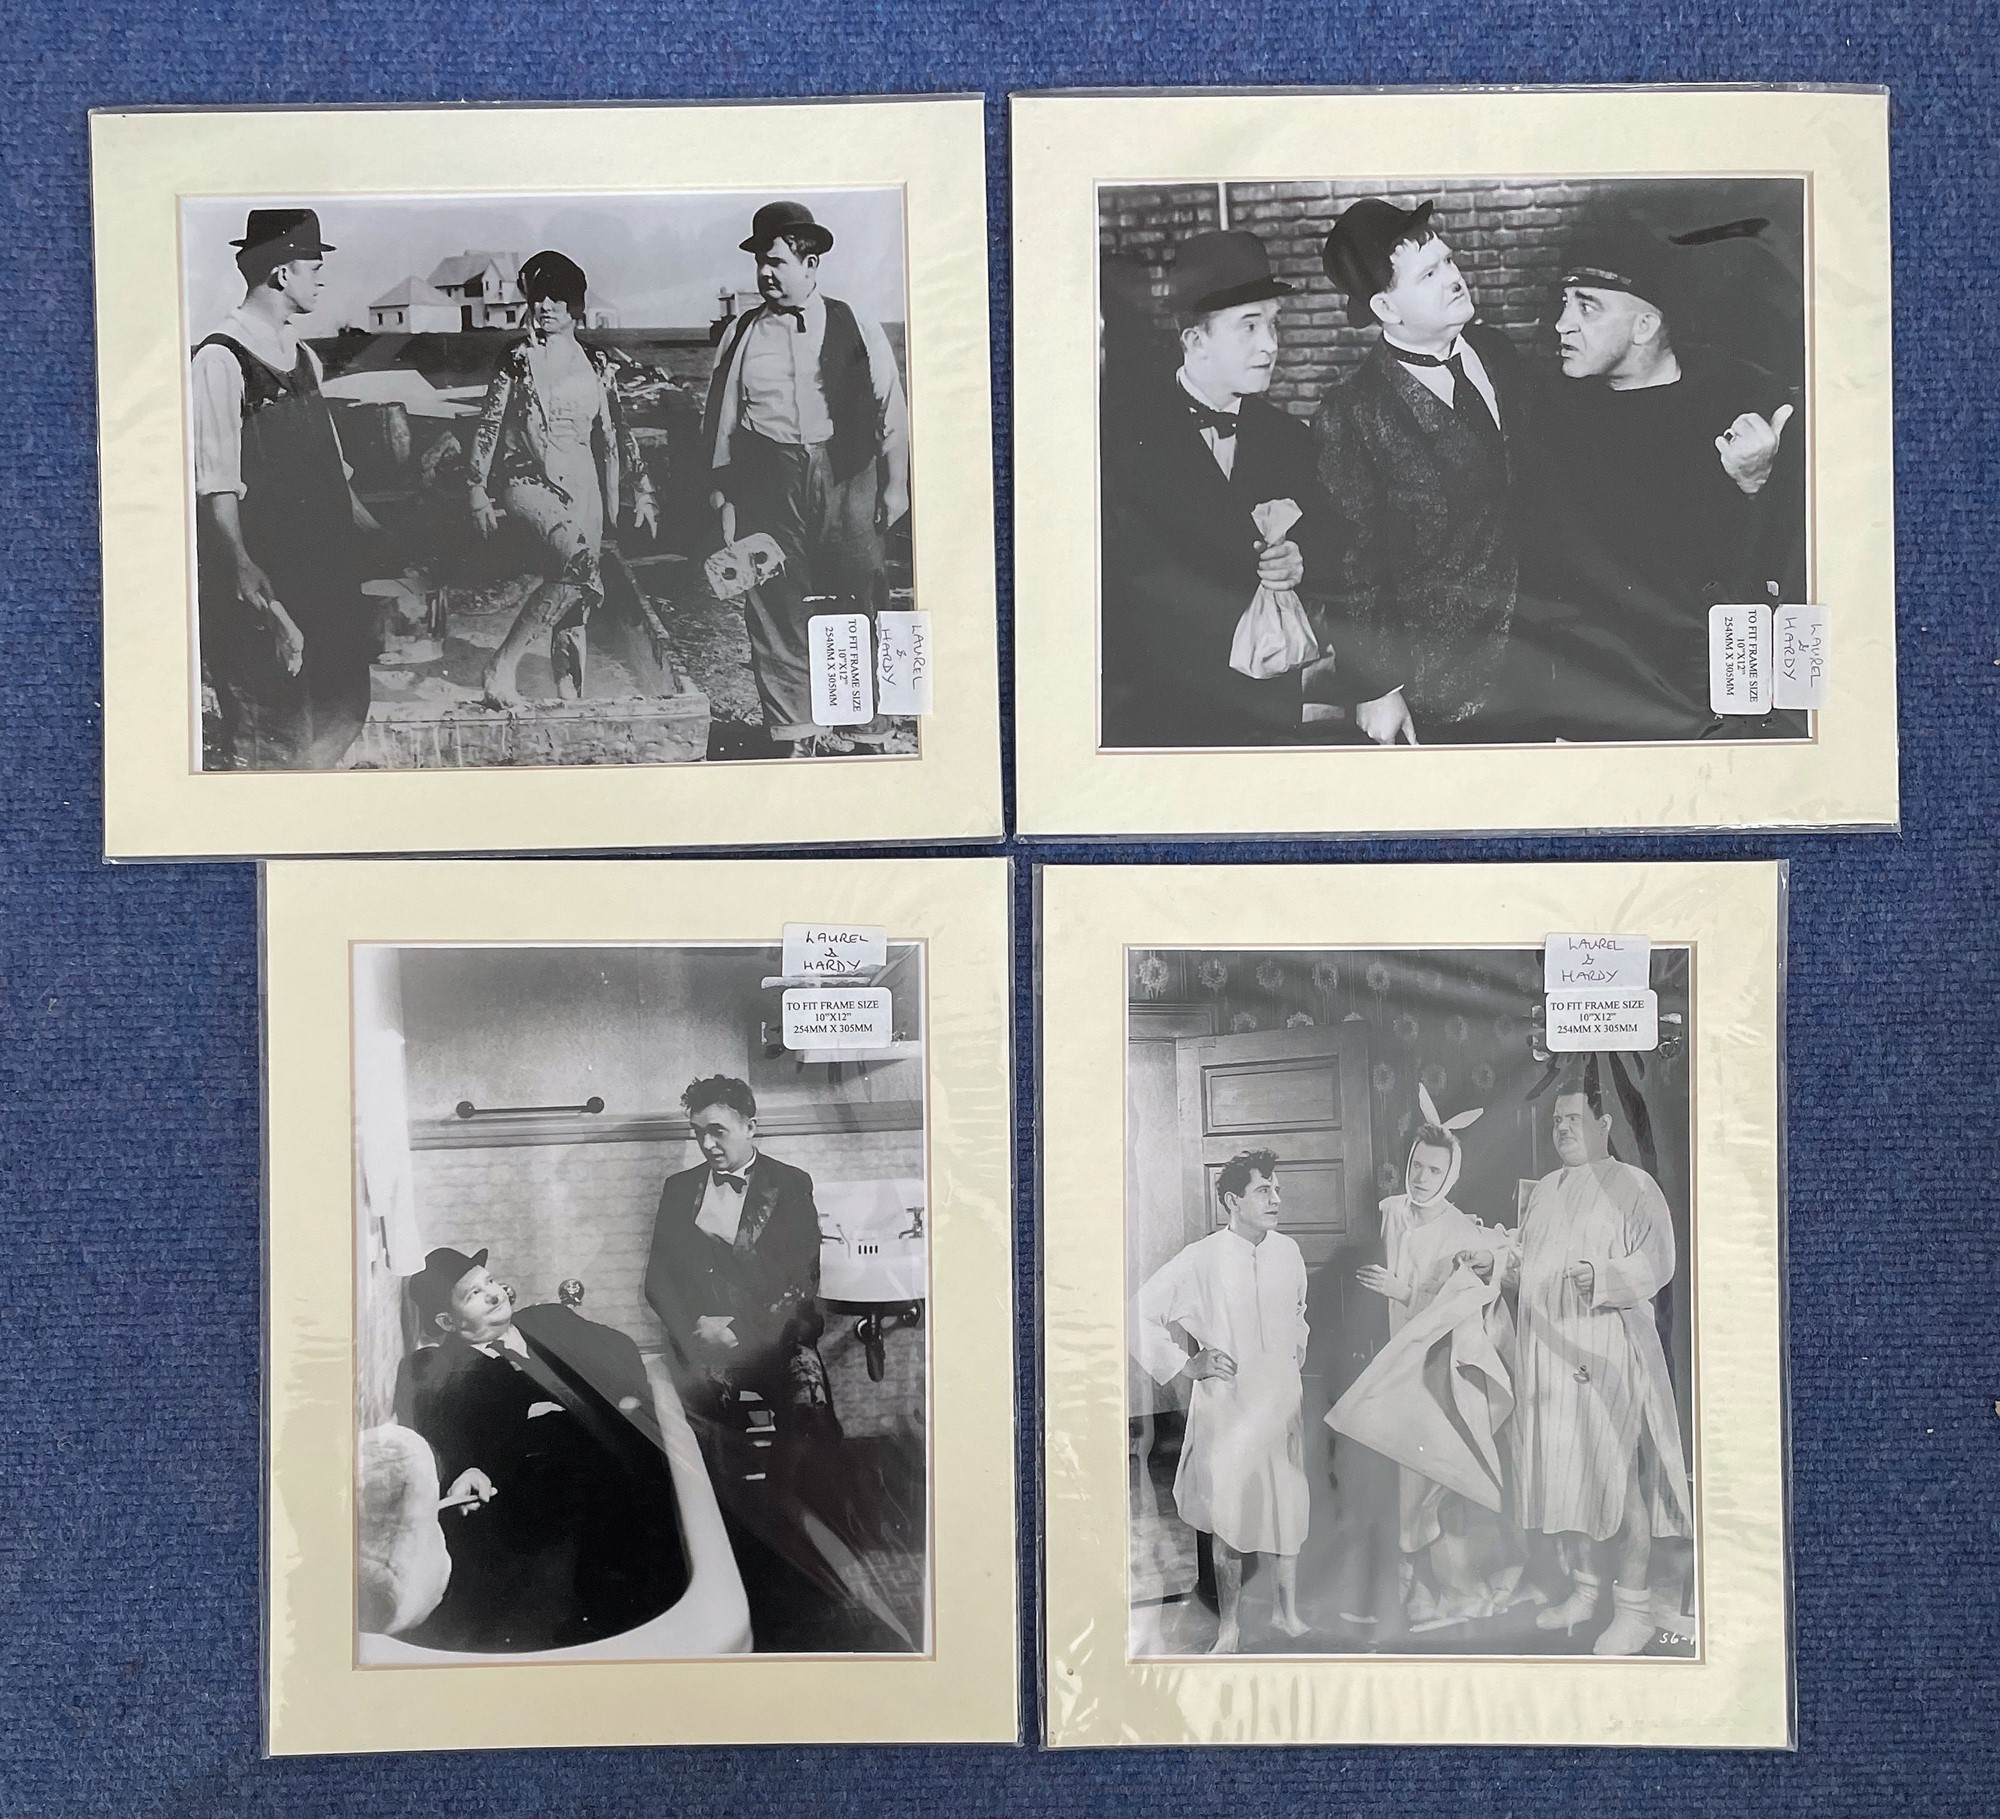 Laurel And Hardy Comedy Legends 8 Mounted 8x10 Photos, Overall Size 10x12. Good condition. All